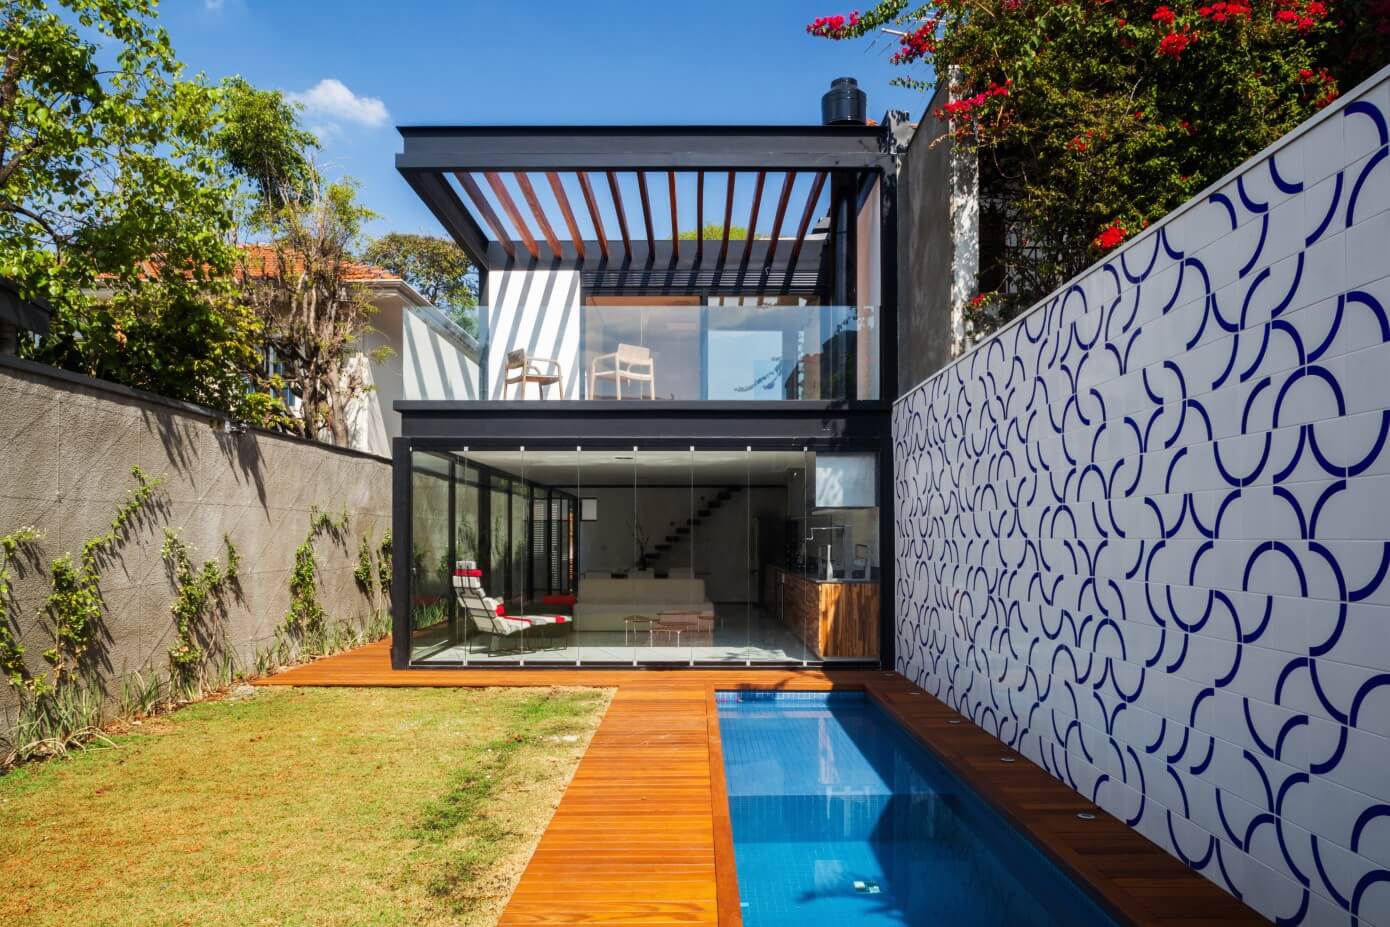 Casa 7×37 by CR2ARCHITECTURE